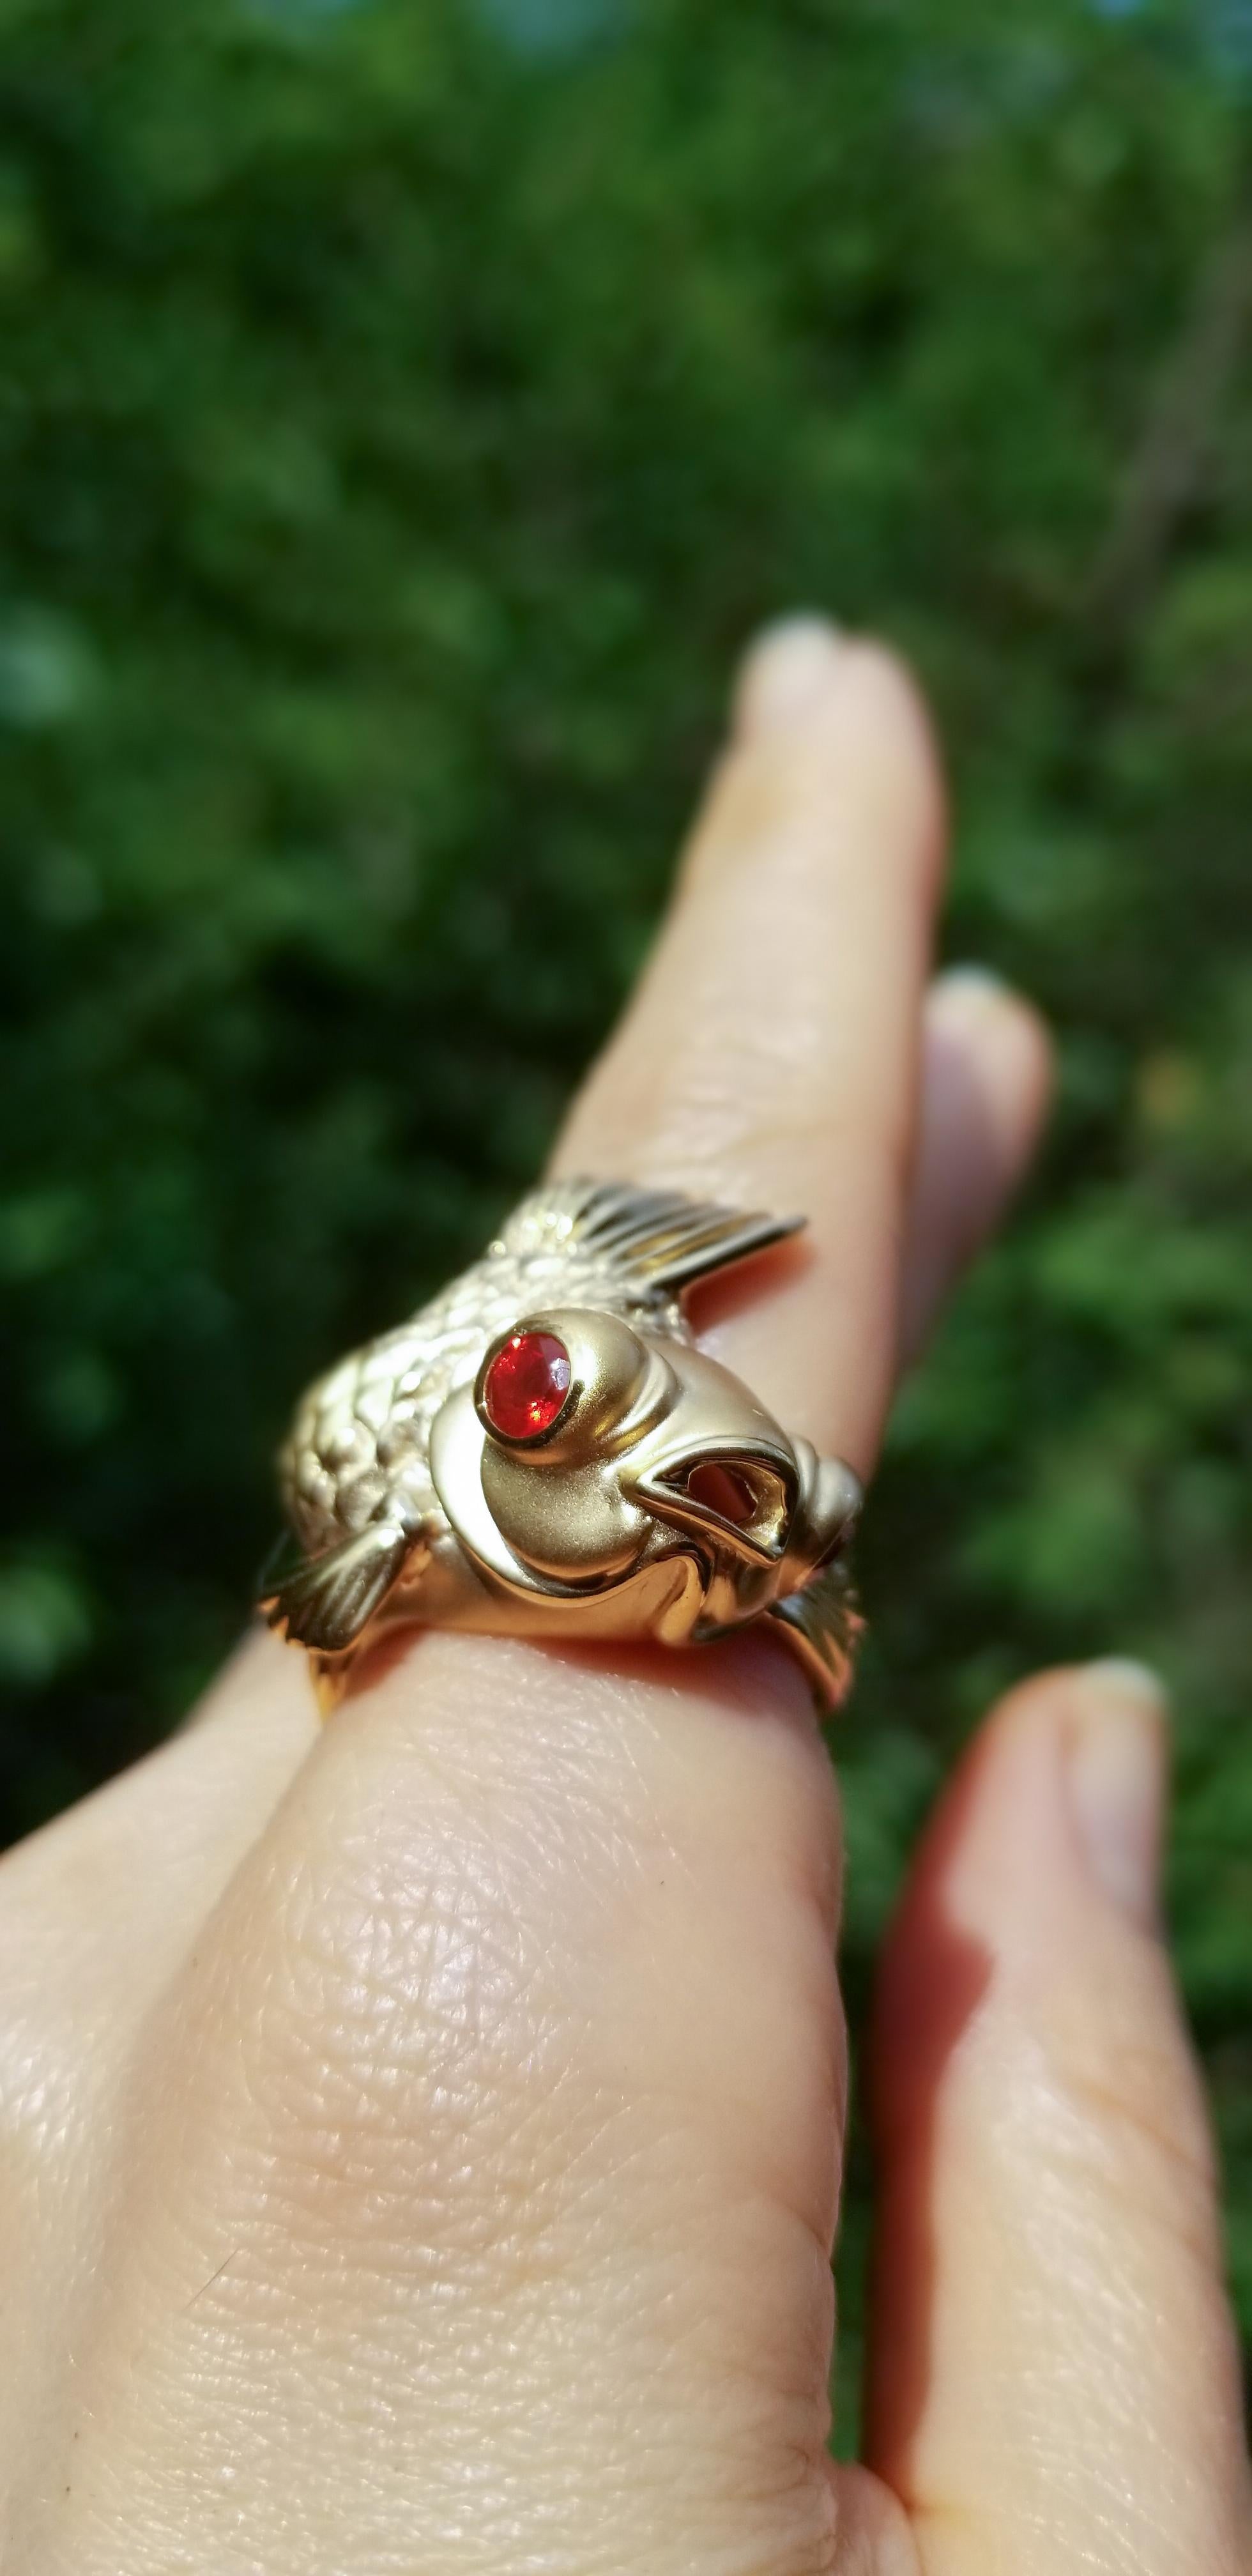 A symbol of good luck, good fortune, and fortitude, this Goldfish swims by on the wearer's hand, his gold body glistening and his fire opal eyes sparkling.
His sinuous body wraps gracefully around a single finger, comfortably close to the